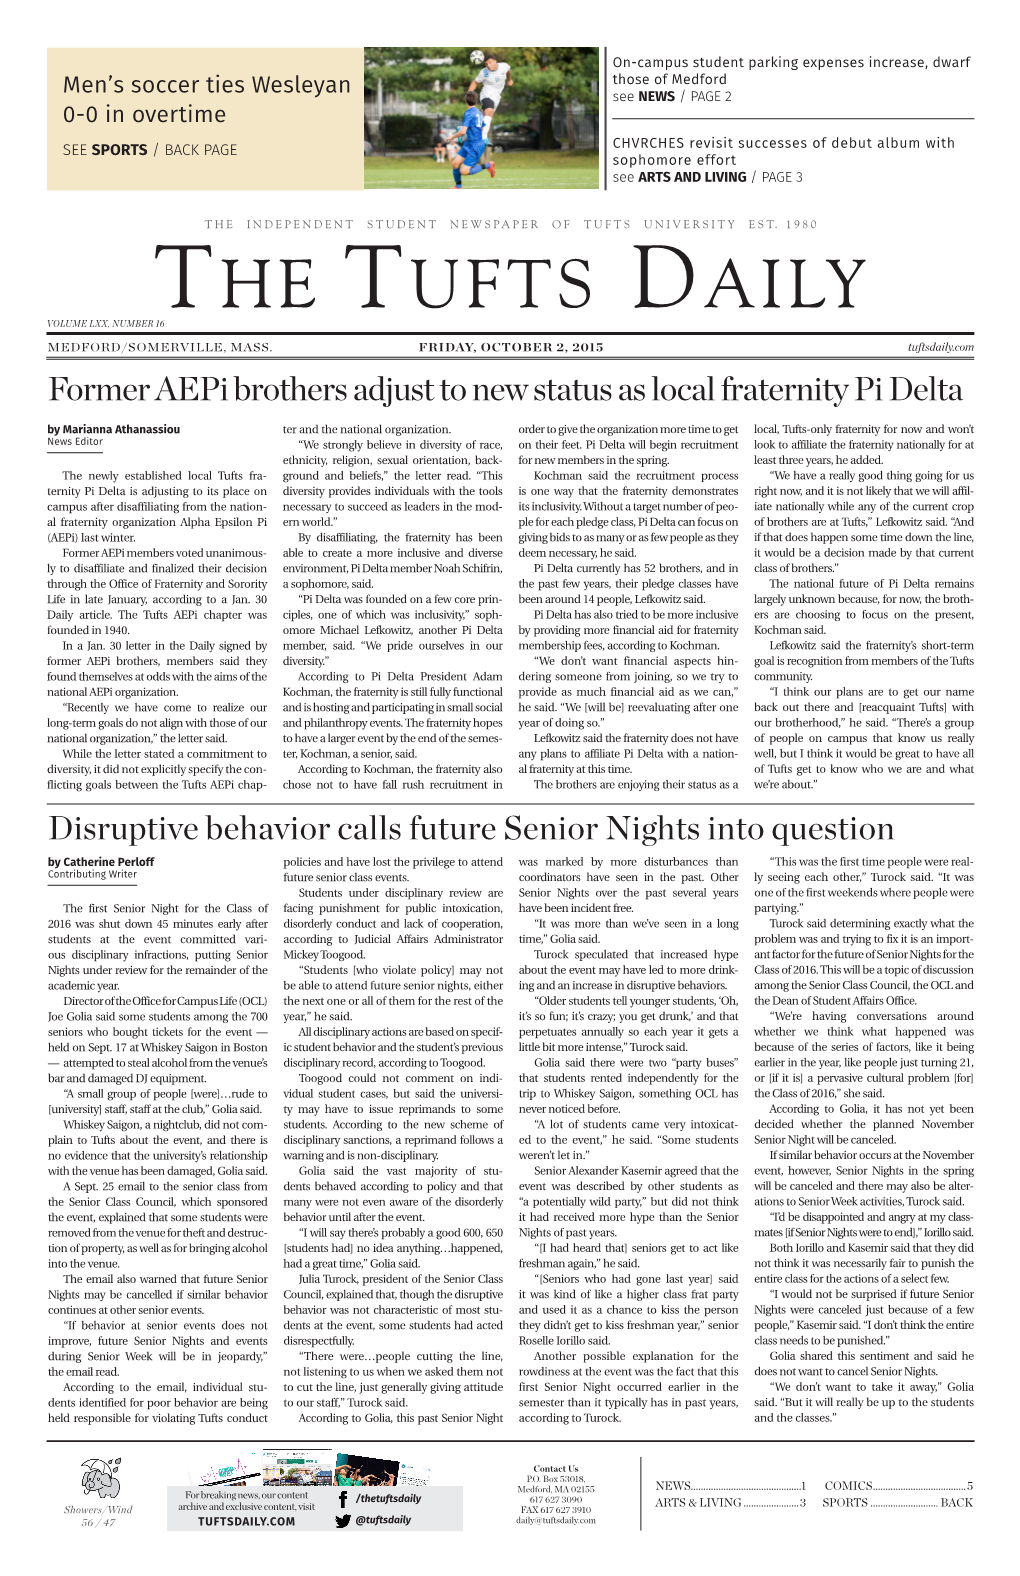 The Tufts Daily Volume Lxx, Number 16